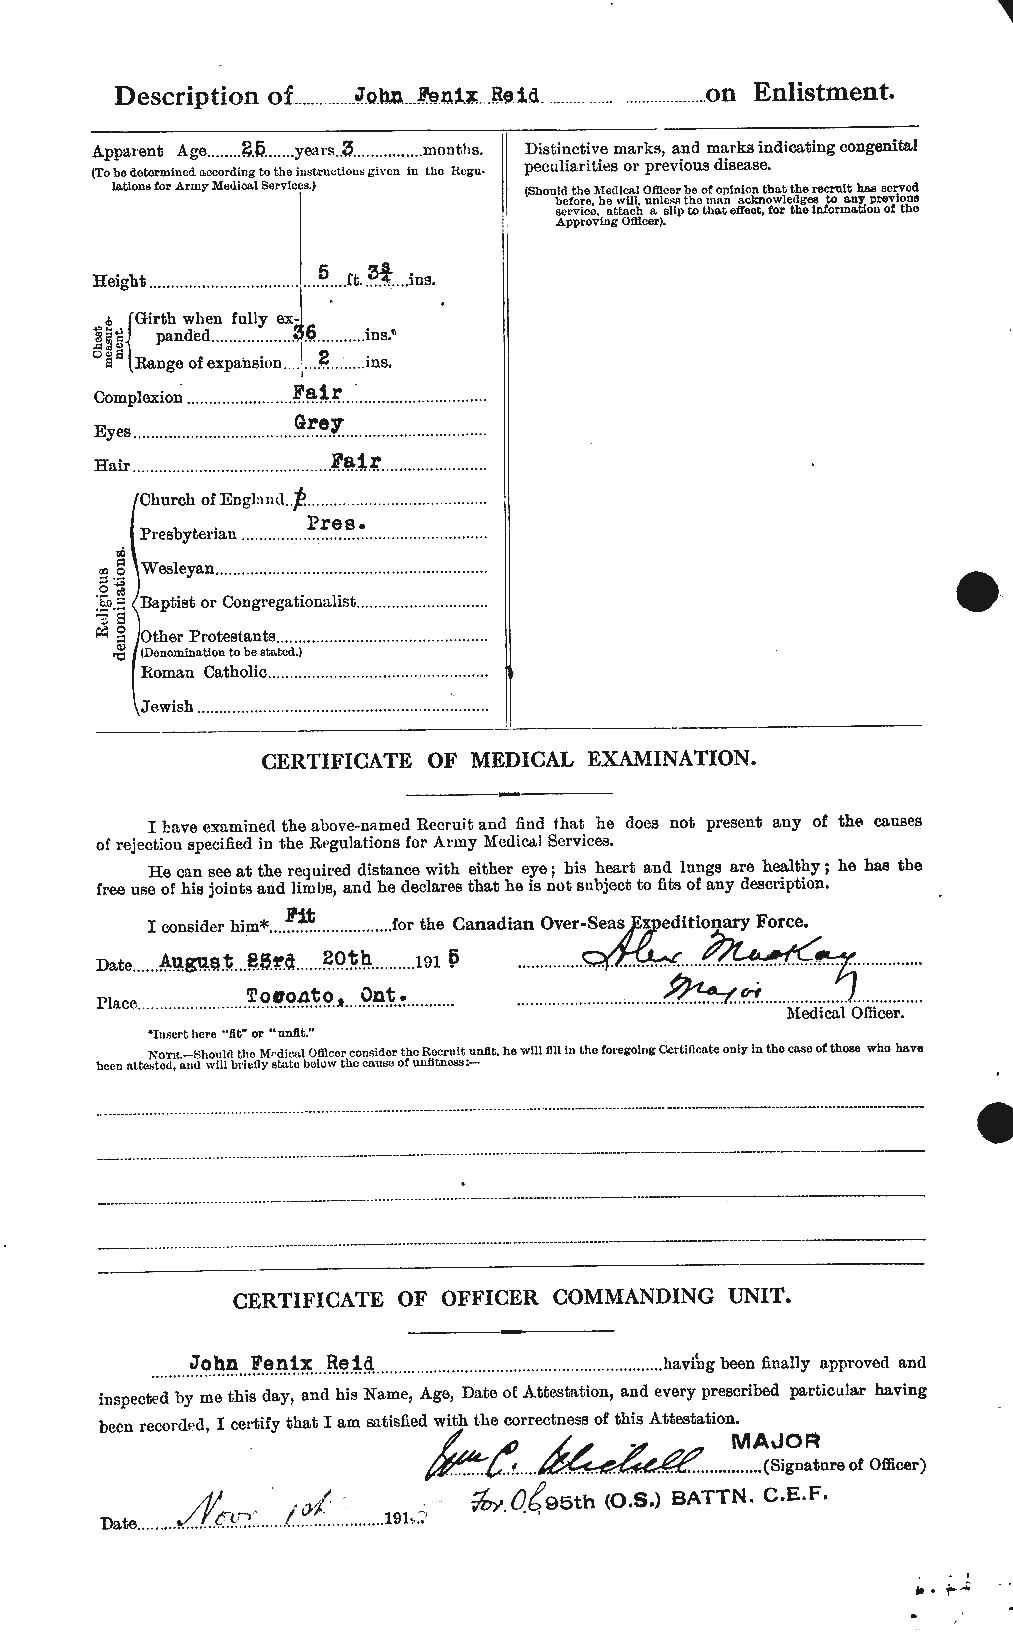 Personnel Records of the First World War - CEF 598837b